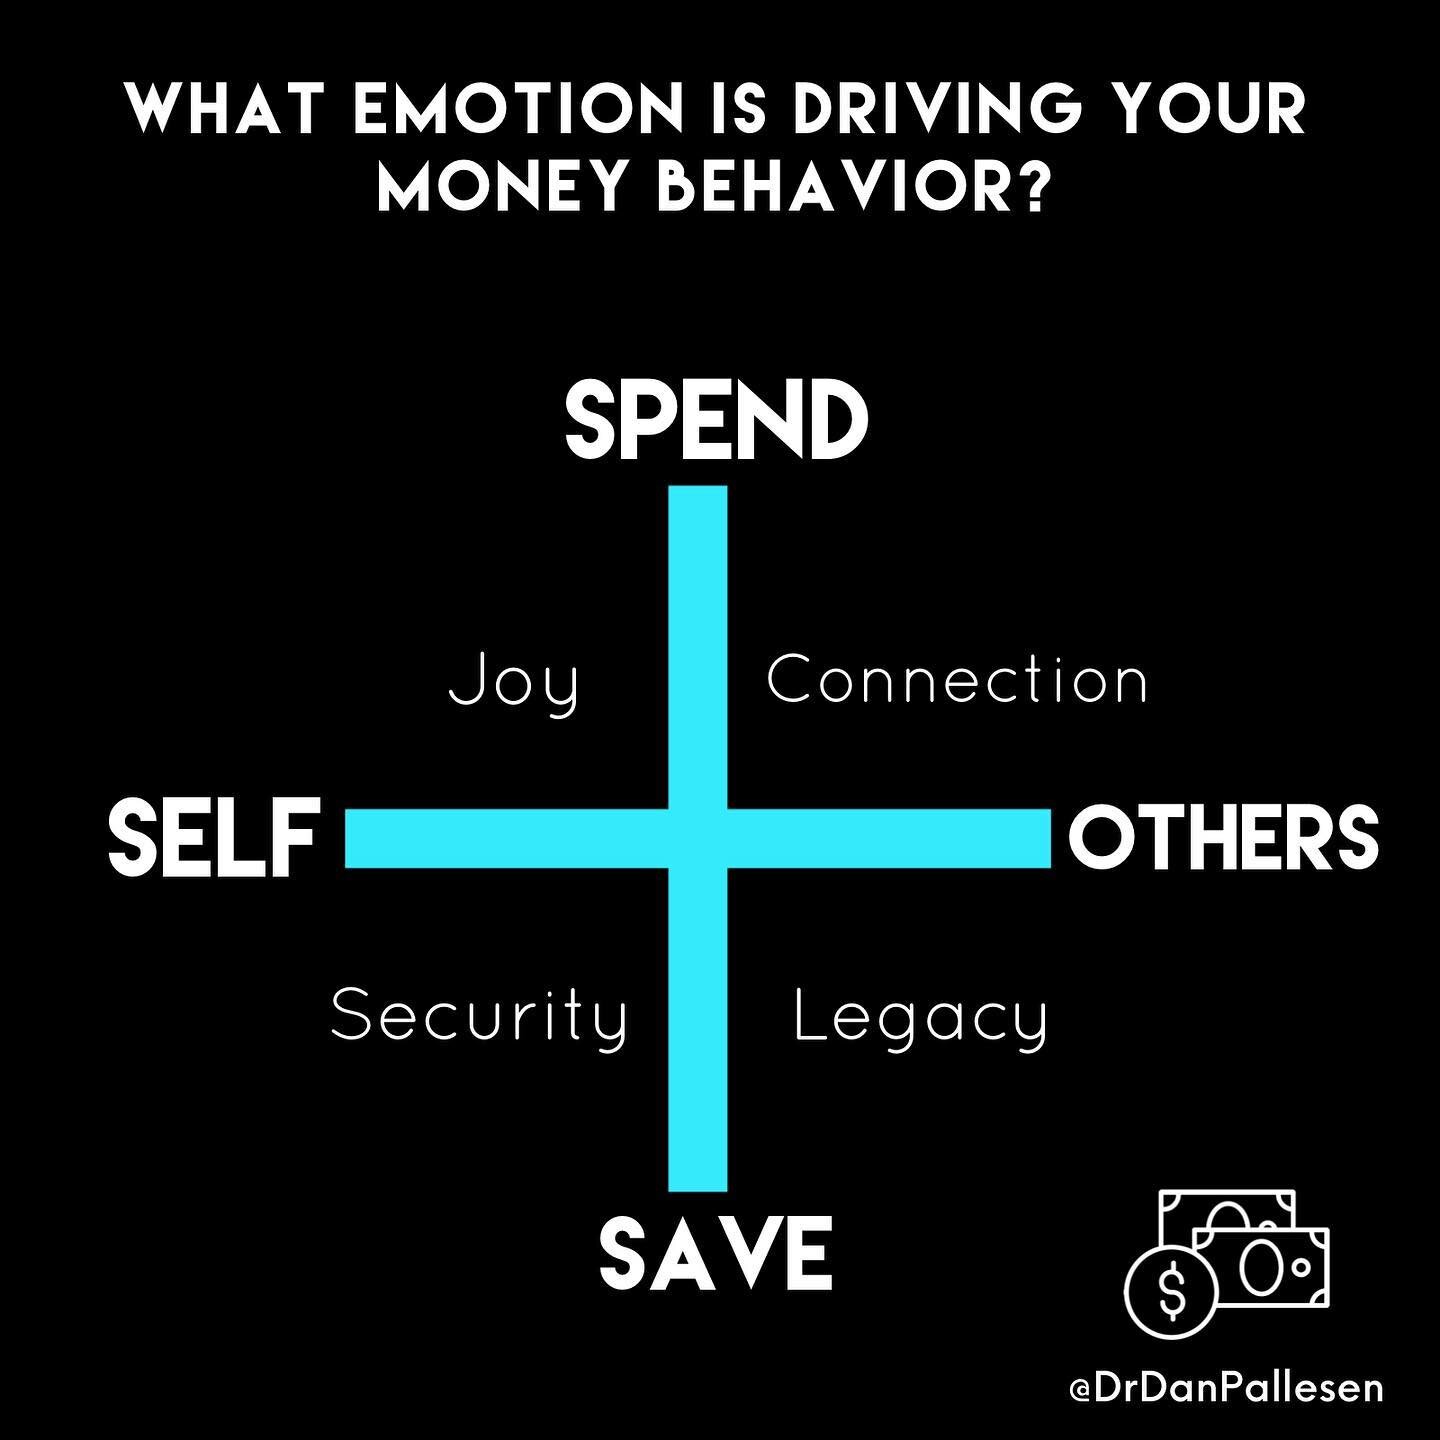 Whether we are saving for ourselves or spending on others, there is often an underlying emotional need driving that money behavior. When we identify those emotional needs, financial decisions become a lot easier. 
.
.
.
#money #financialfreedom #weal